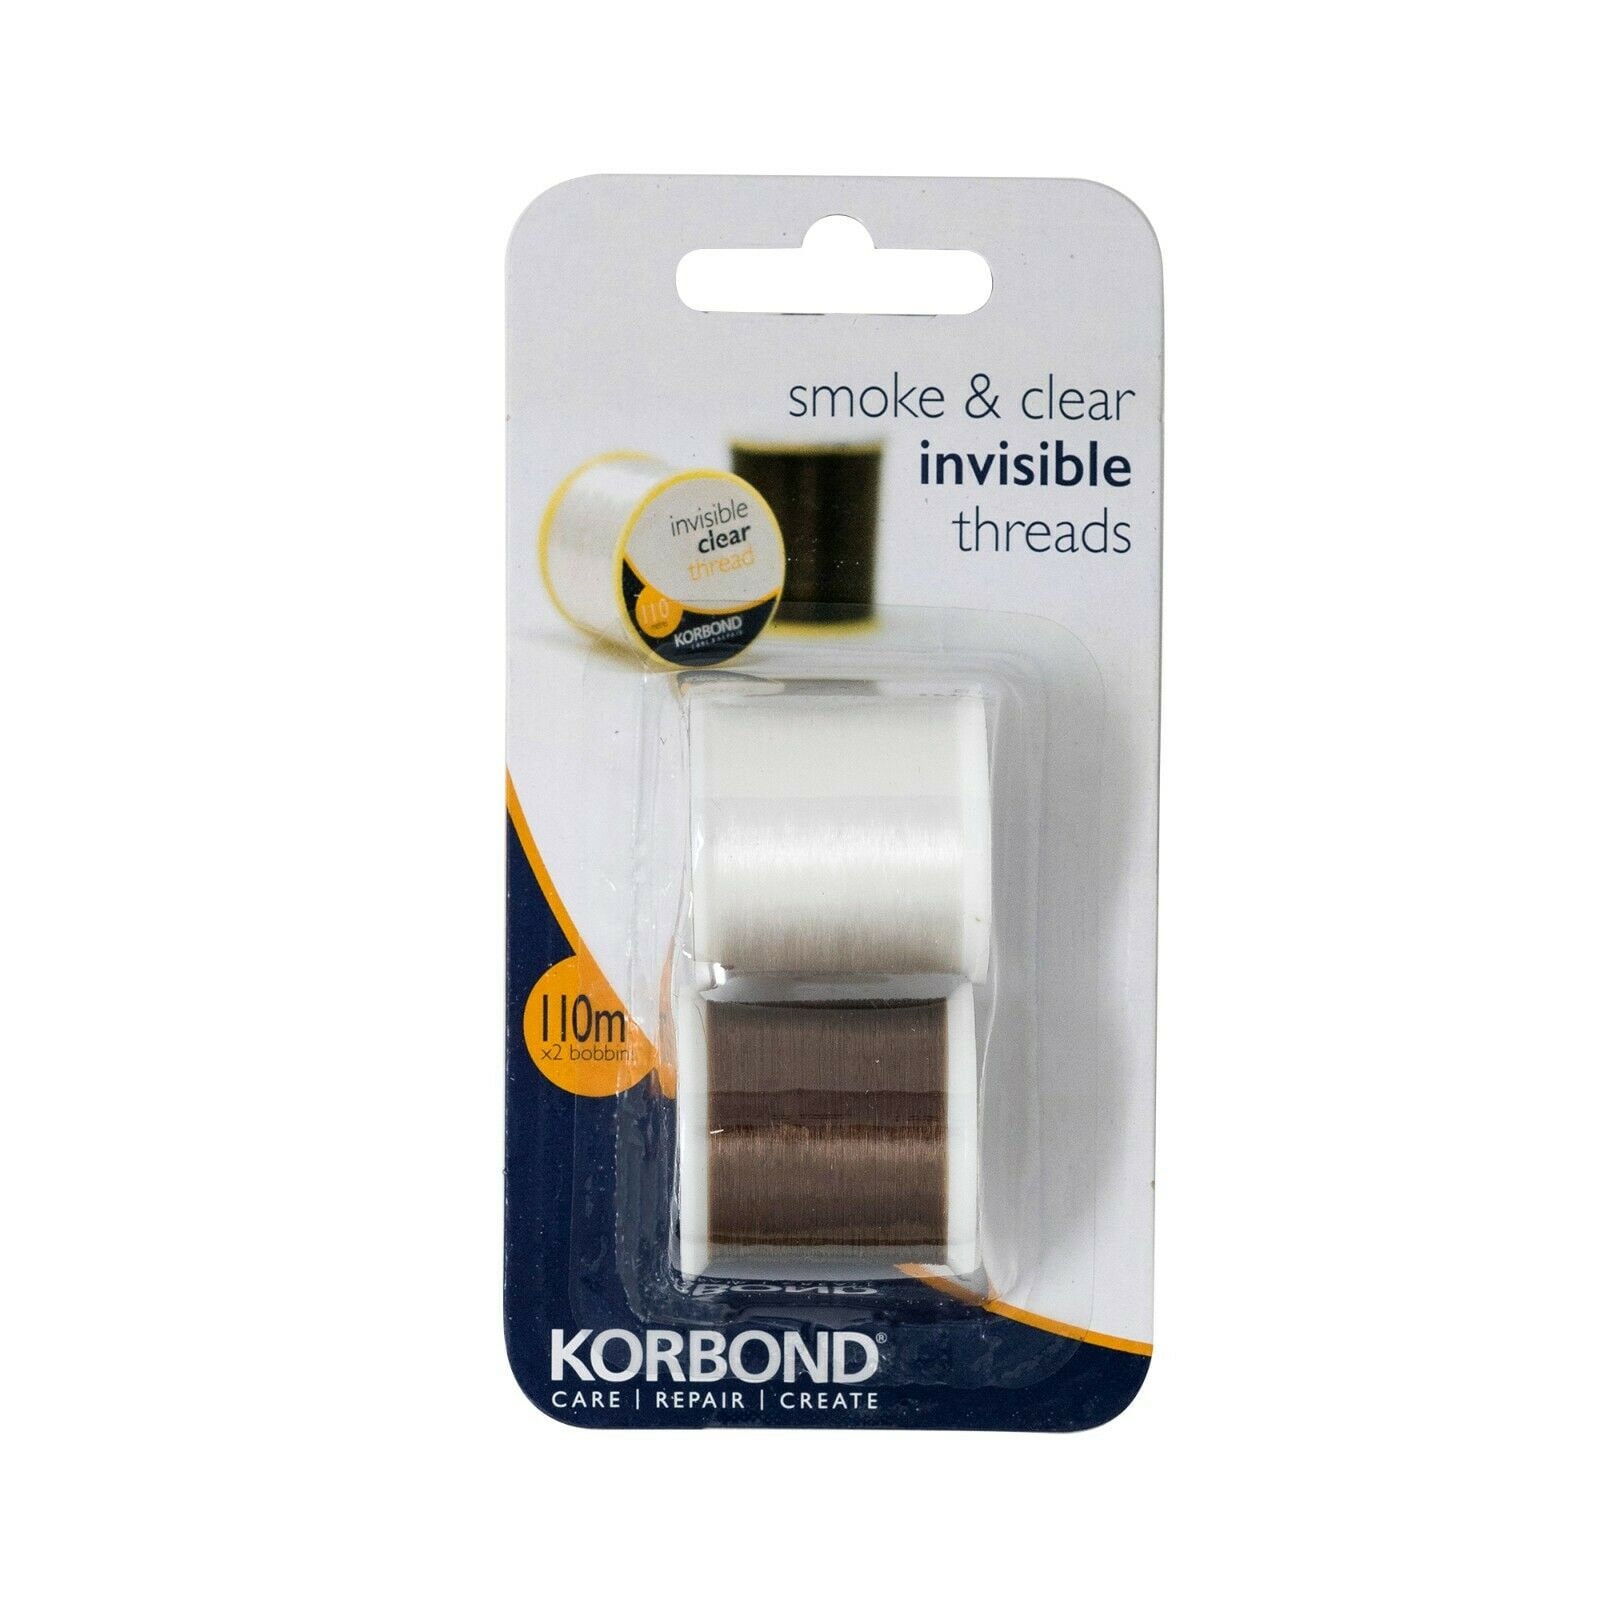 Korbond Twin Pack Invisible Smoke & Clear Threads 2 X 110m Reels